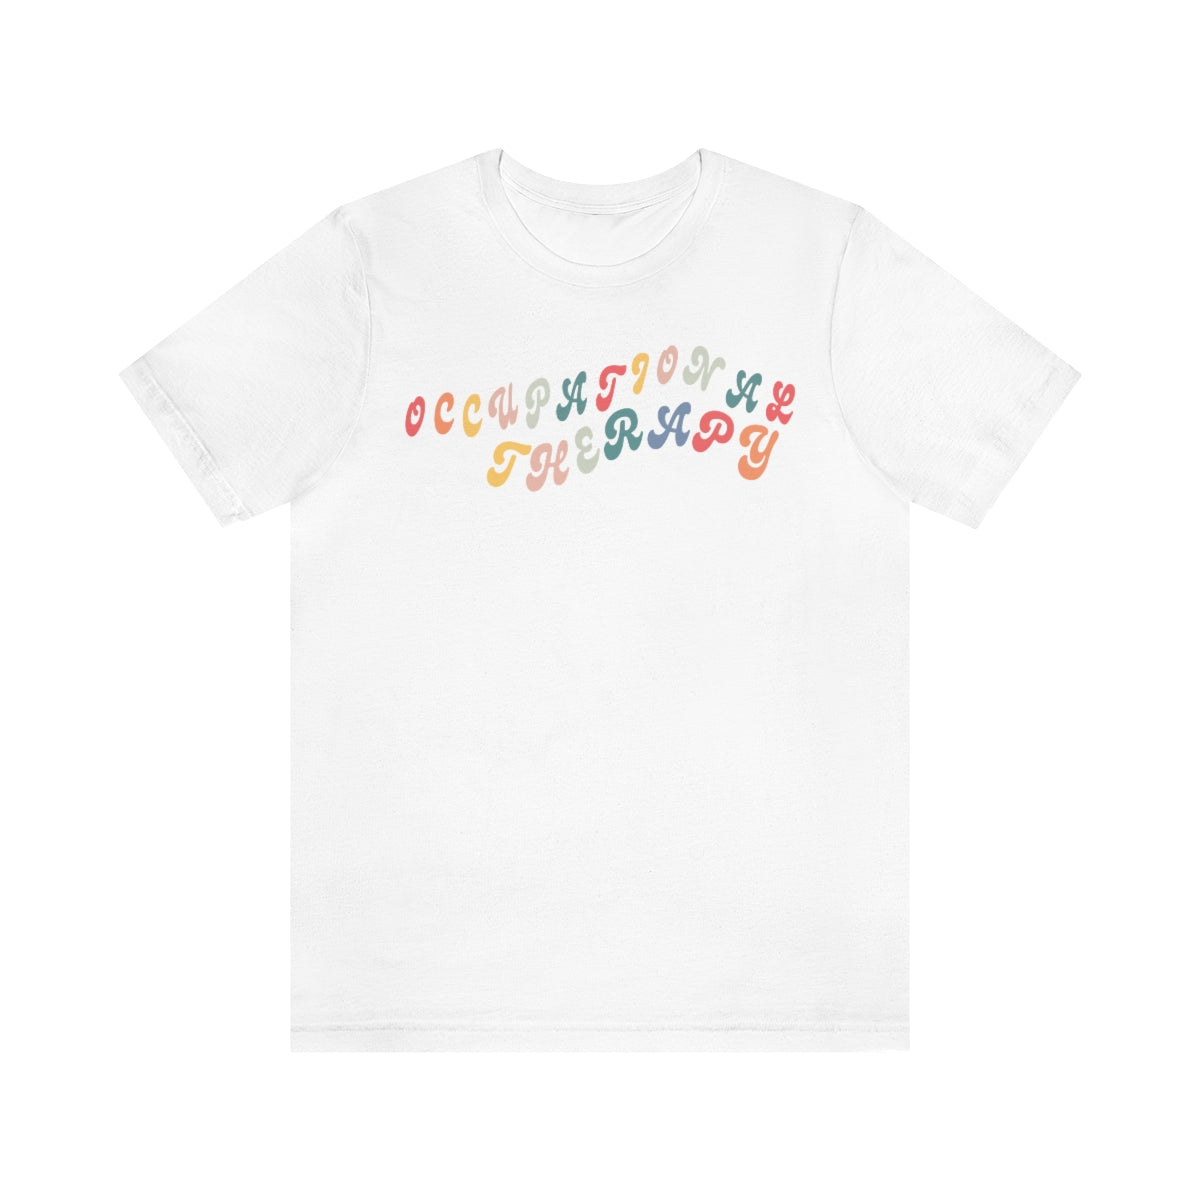 Groovy Occupational Therapy OT Therapist Shirt Graphic Tee Unisex